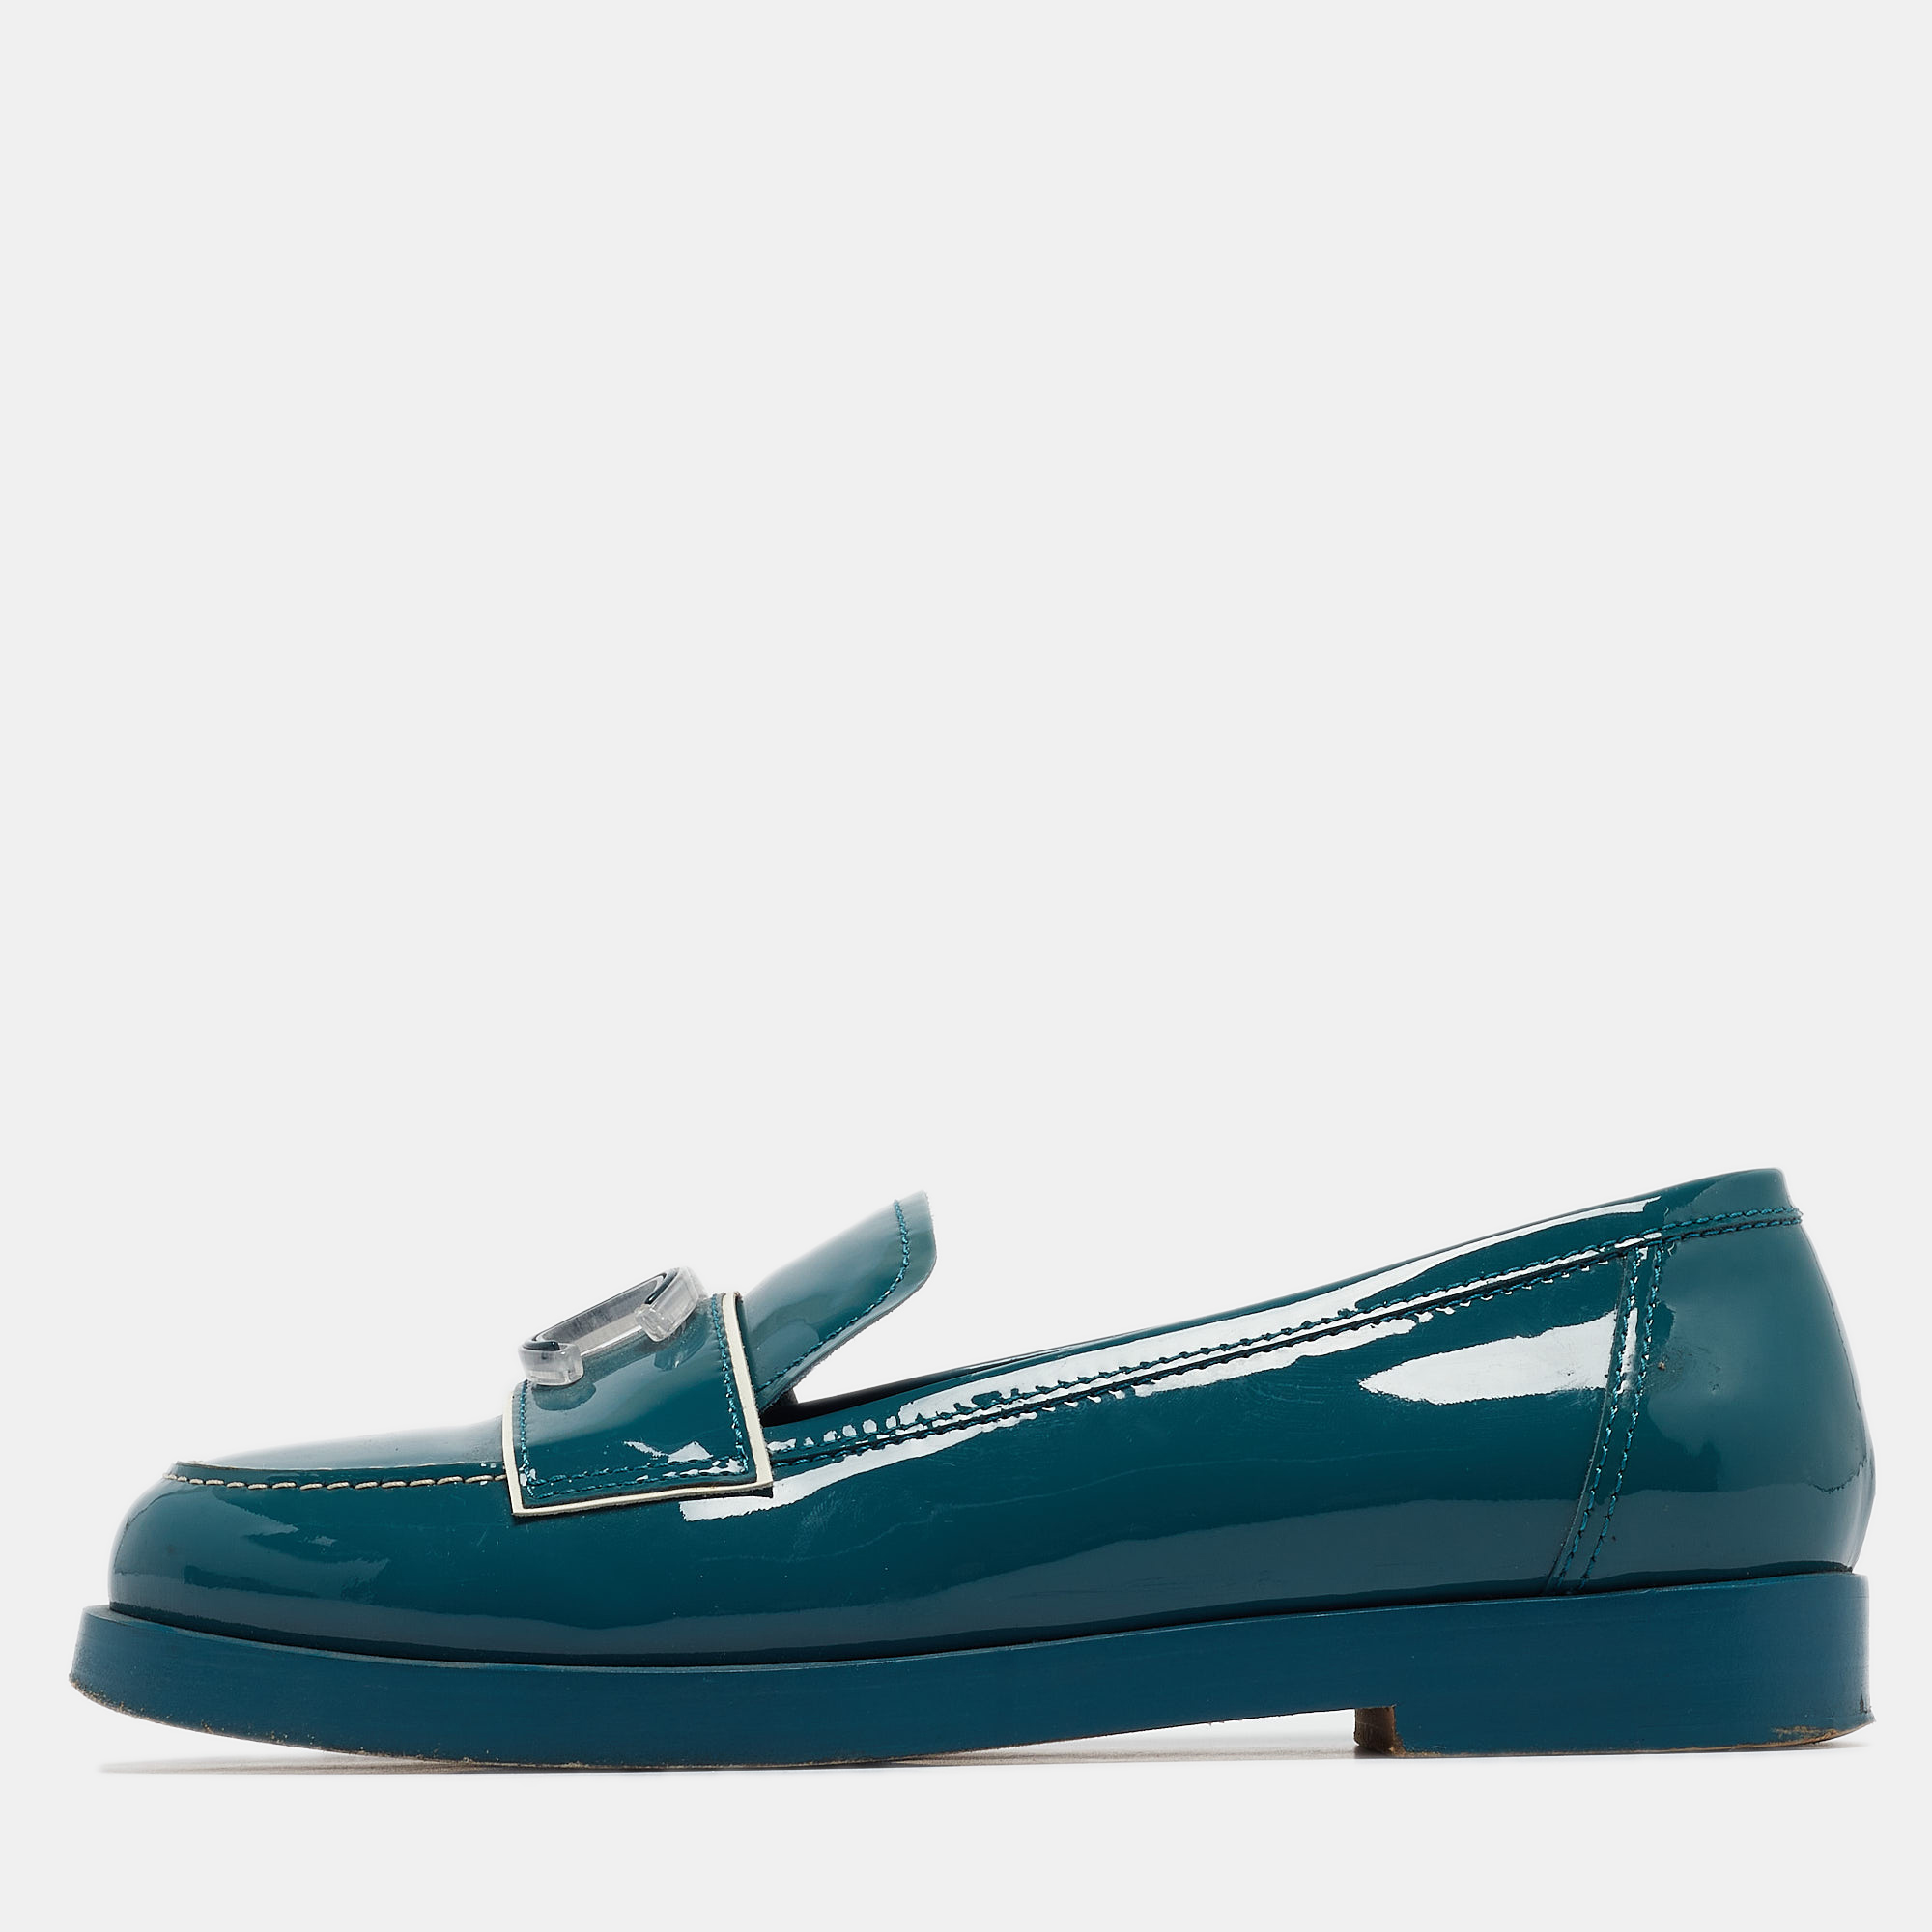 Chanel turquoise patent leather cc slip on loafers size 37